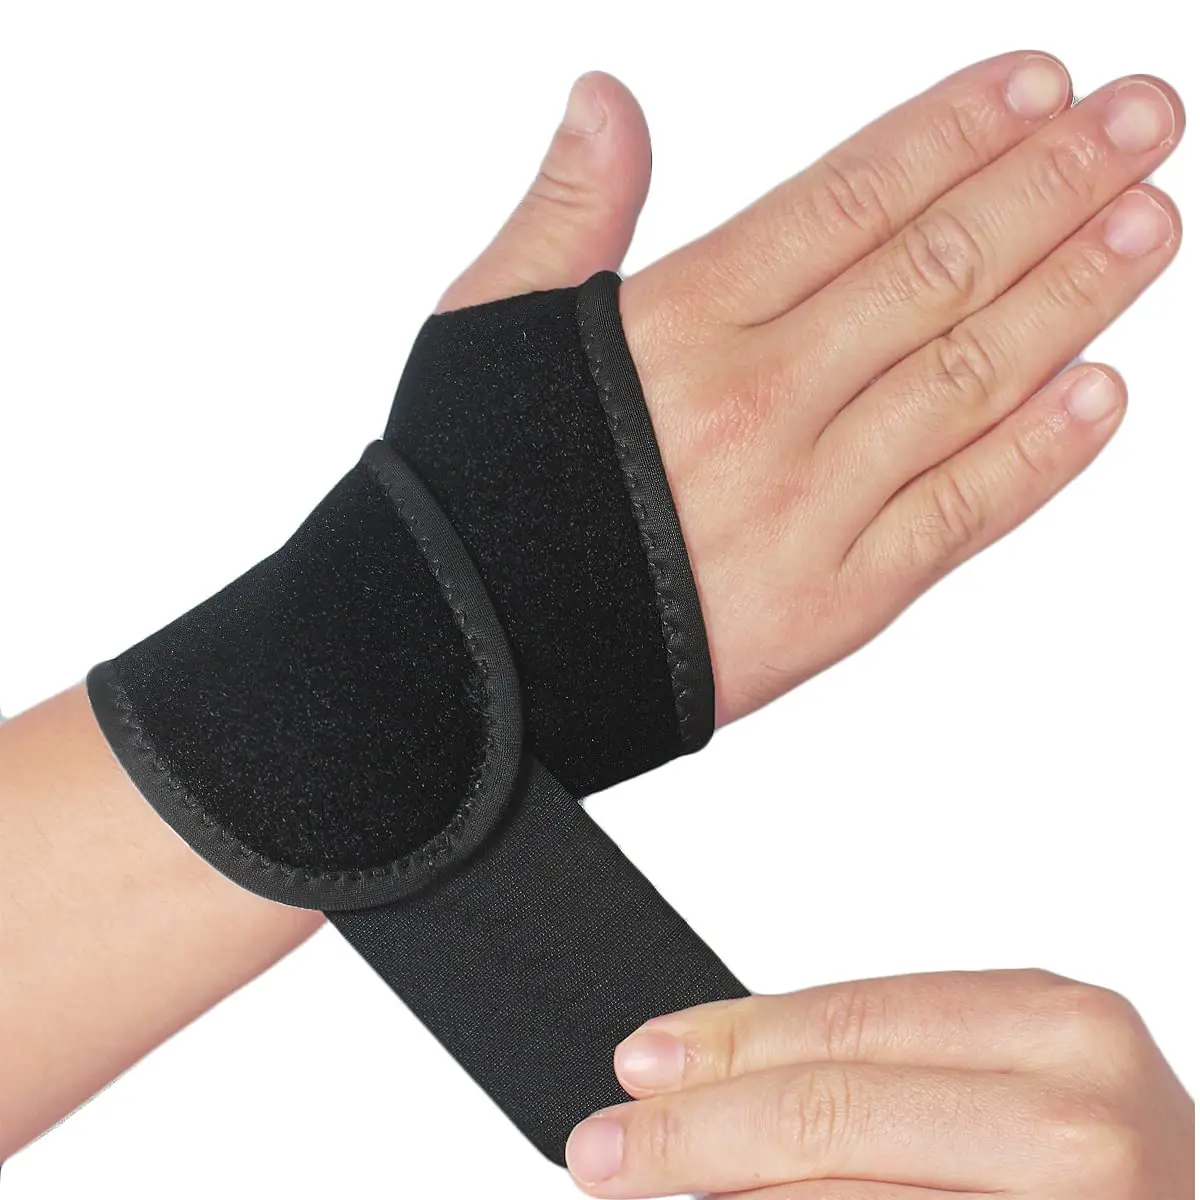 Adjustable Wrist Support with thumb hole for for Arthritis and Tendinitis